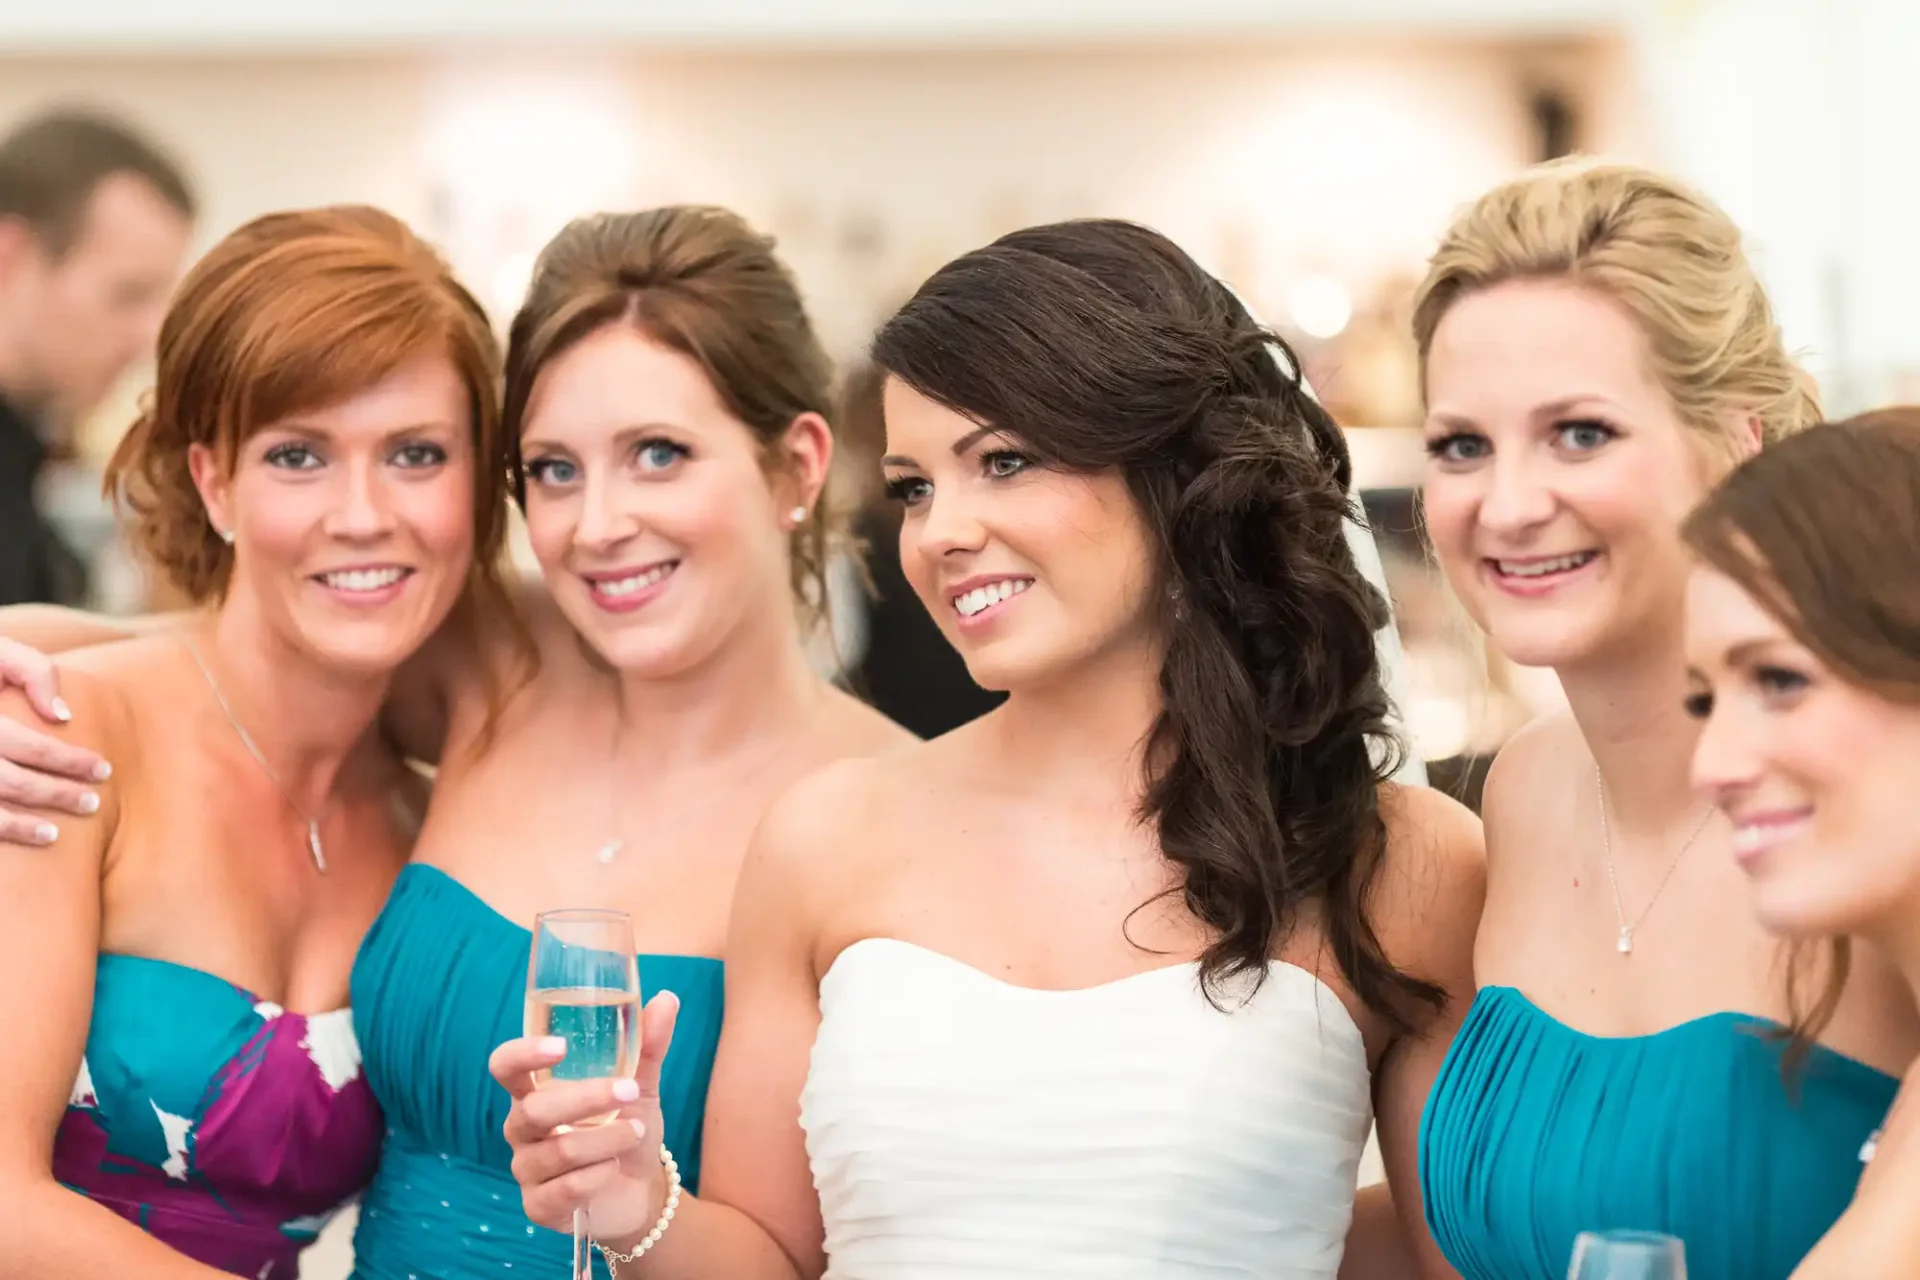 Five women in formal attire at an event, with one in a white dress holding a champagne flute, surrounded by others in matching blue dresses.